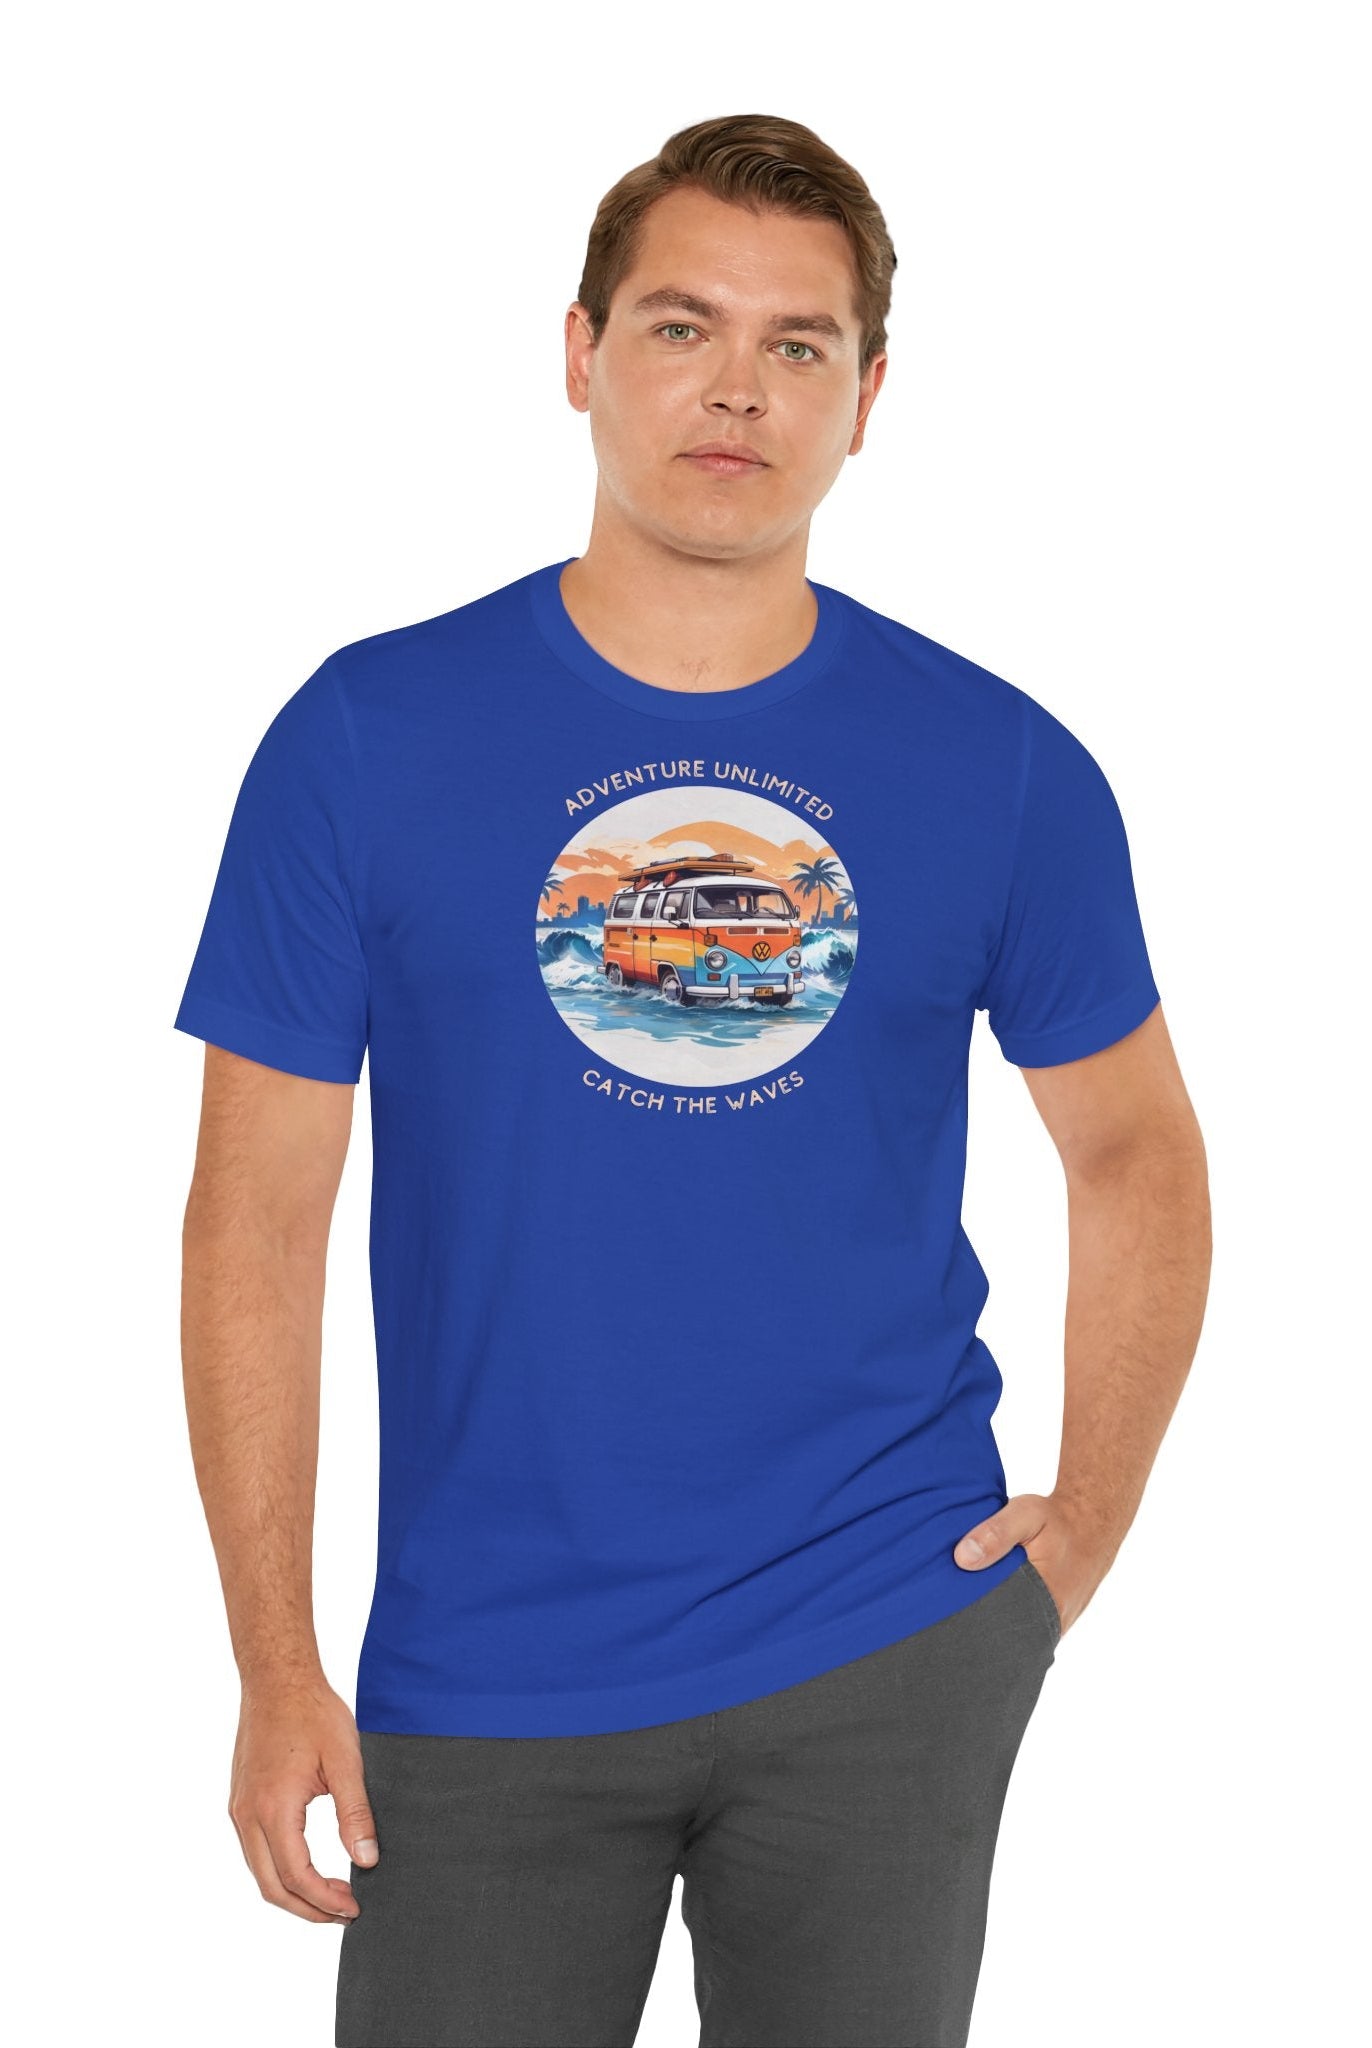 Man wearing Adventure Unlimited direct-to-garment printed Surfing T-Shirt by Soulshinecreators